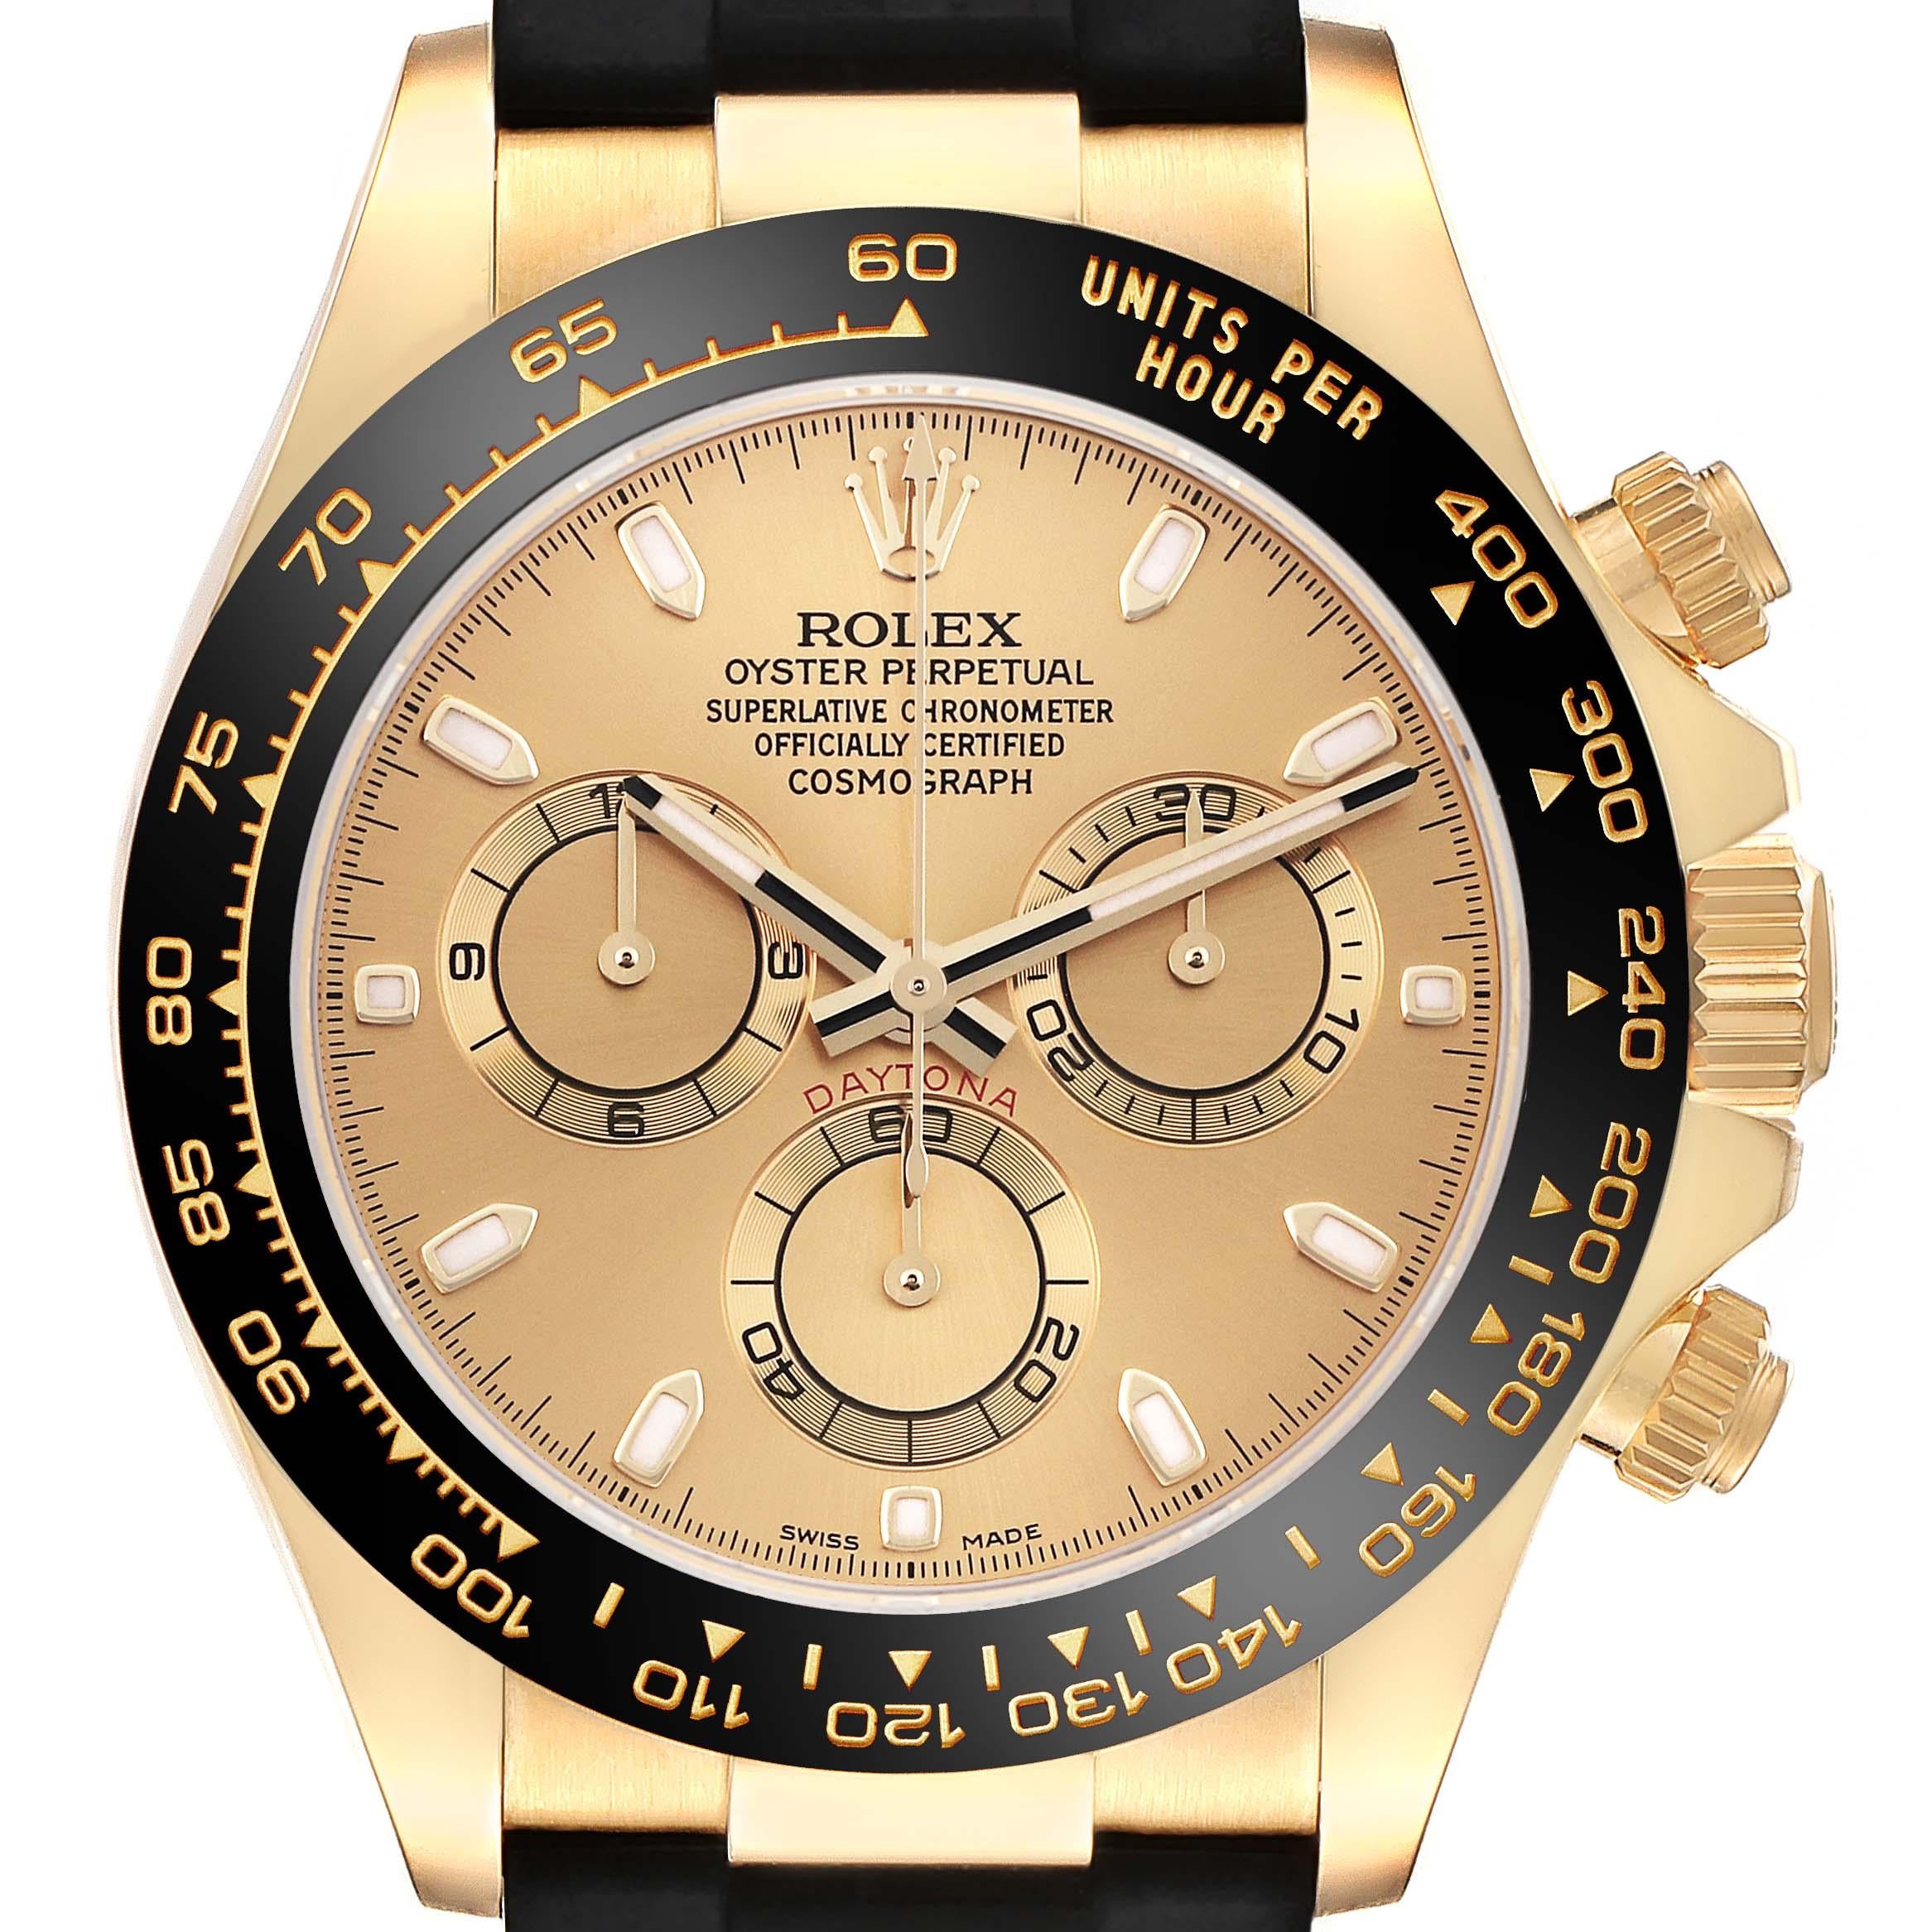 Rolex Daytona Yellow Gold Champagne Dial Mens Watch 116518 Box Card. Officially certified chronometer automatic self-winding movement. Chronograph function. 18K yellow gold case 40.0 mm in diameter.  Special screw-down push buttons. Black Cerachrom